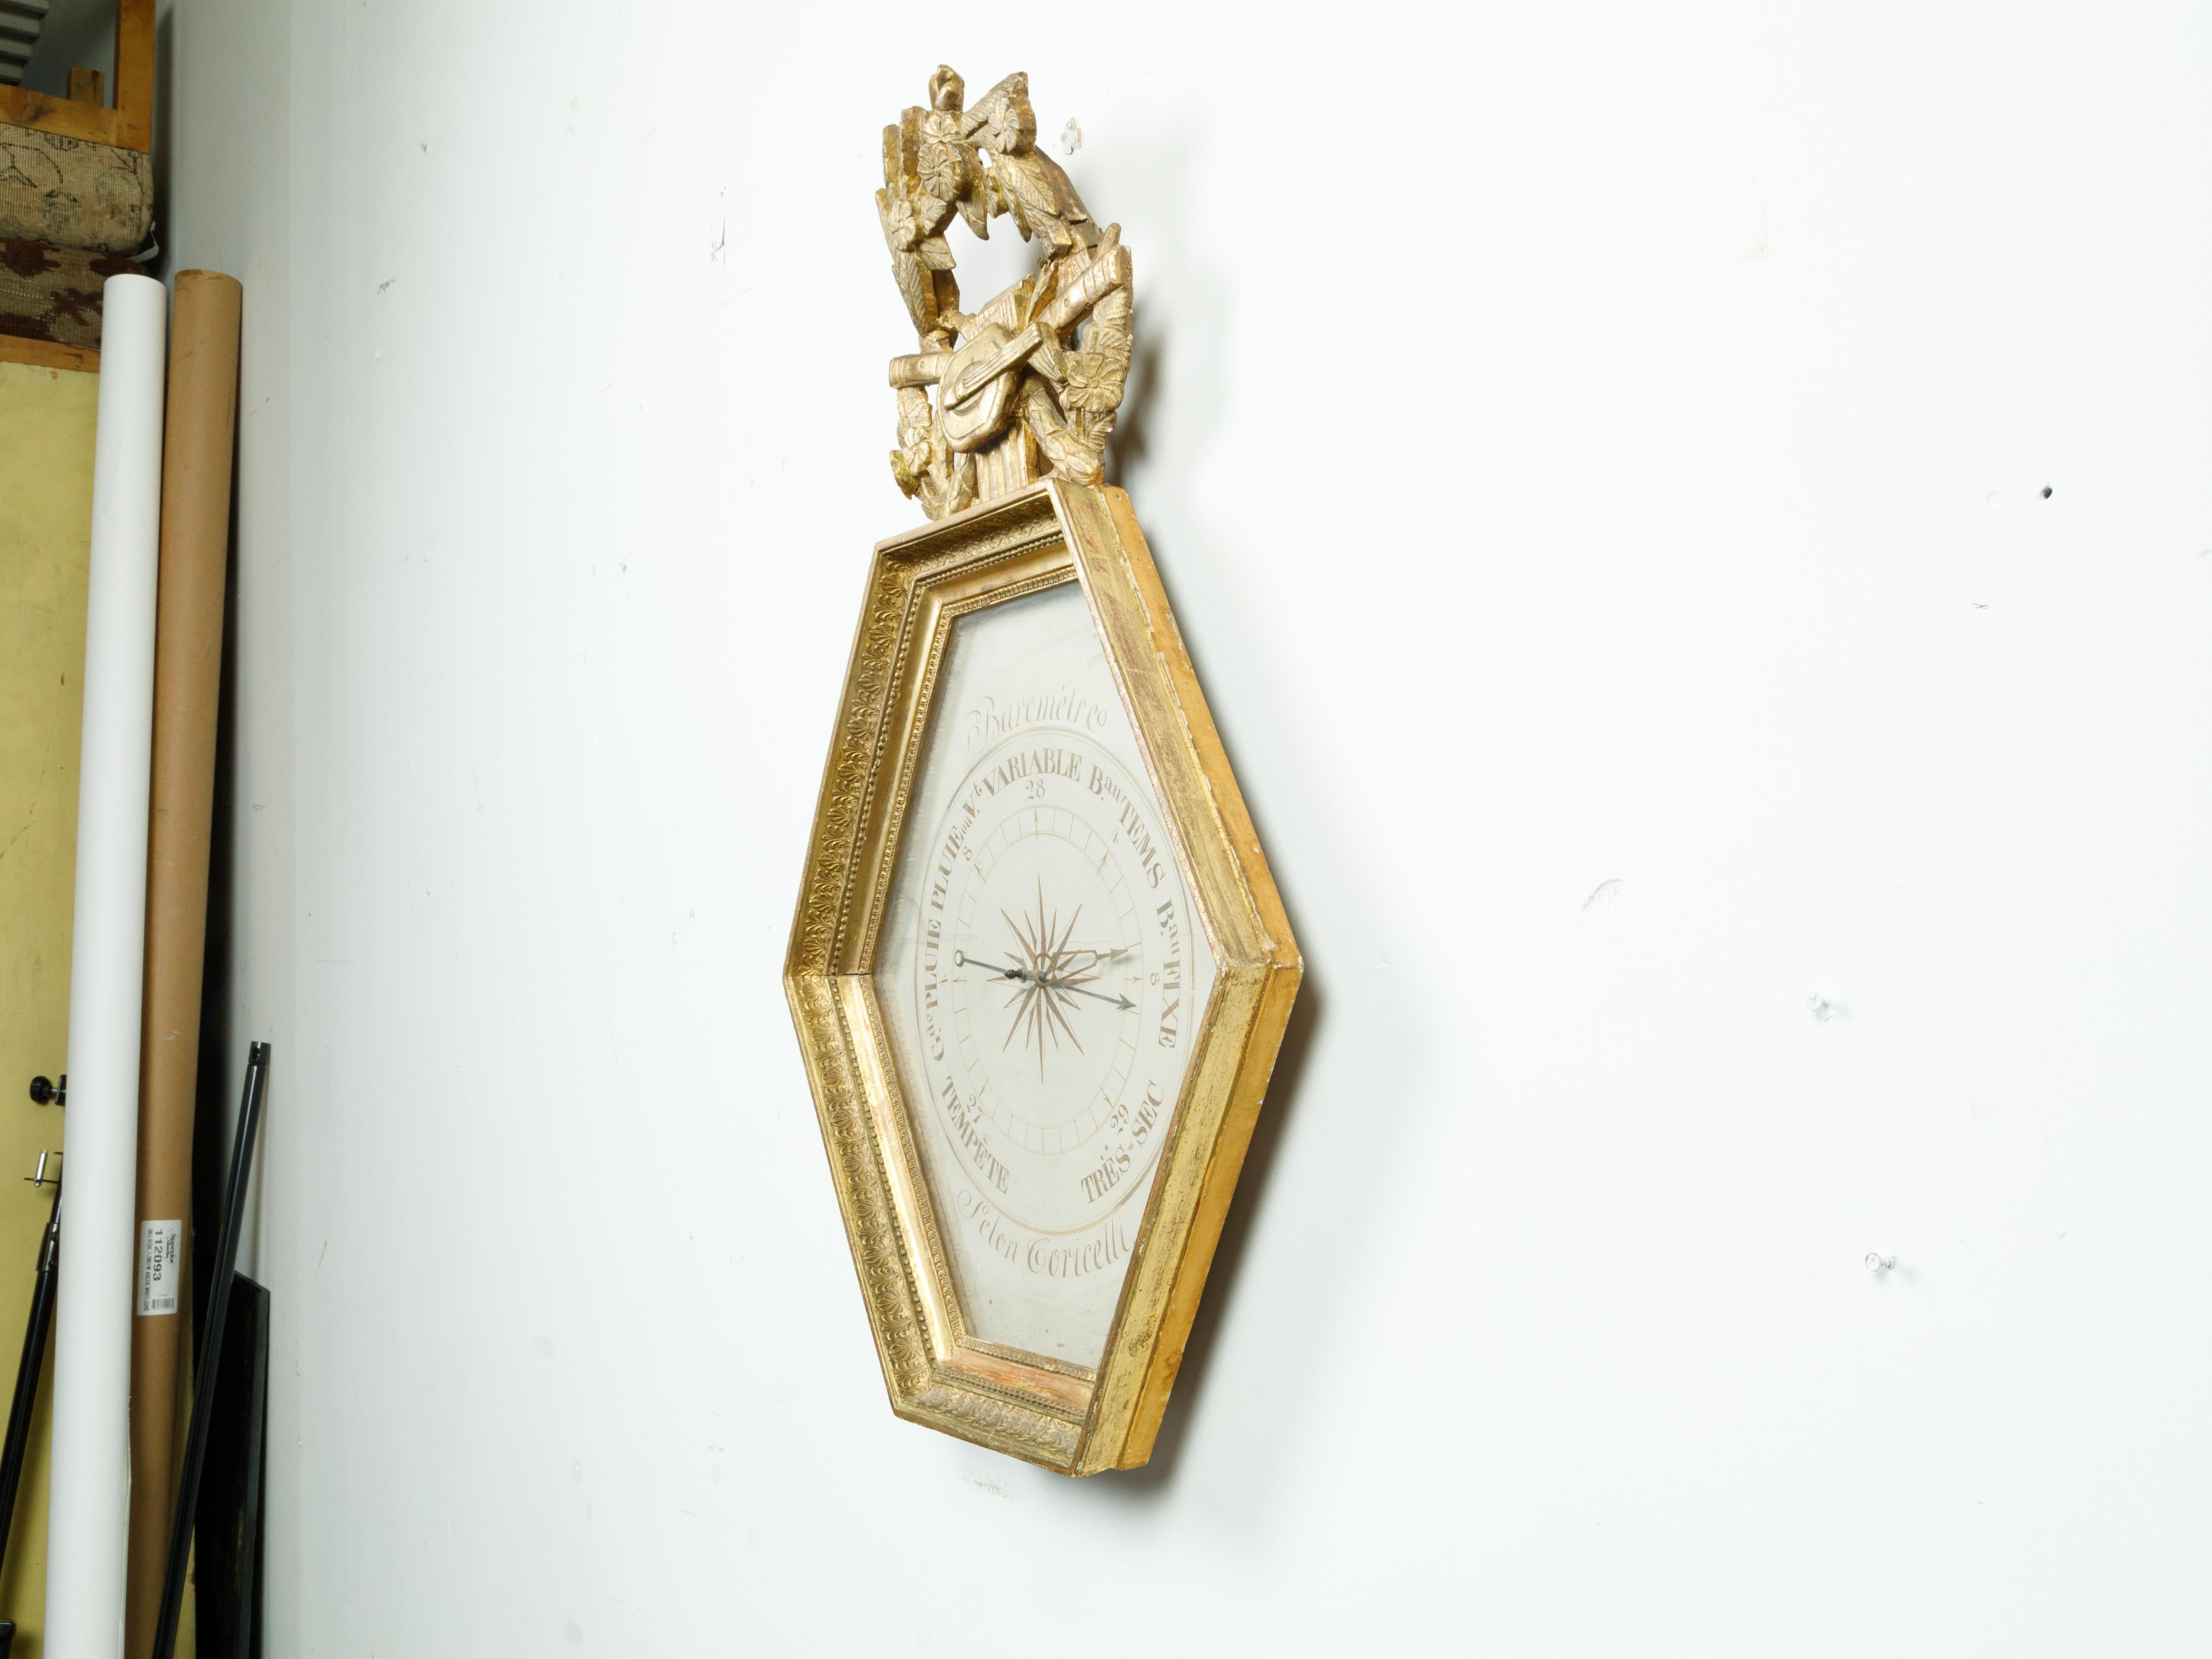 A French carved giltwood hexagonal barometer from the 19th century, after Toricelli and topped with Allegory of the Liberal Arts. Created in France during the 19th century, this giltwood barometer is adorned with a carved crest depicting musical